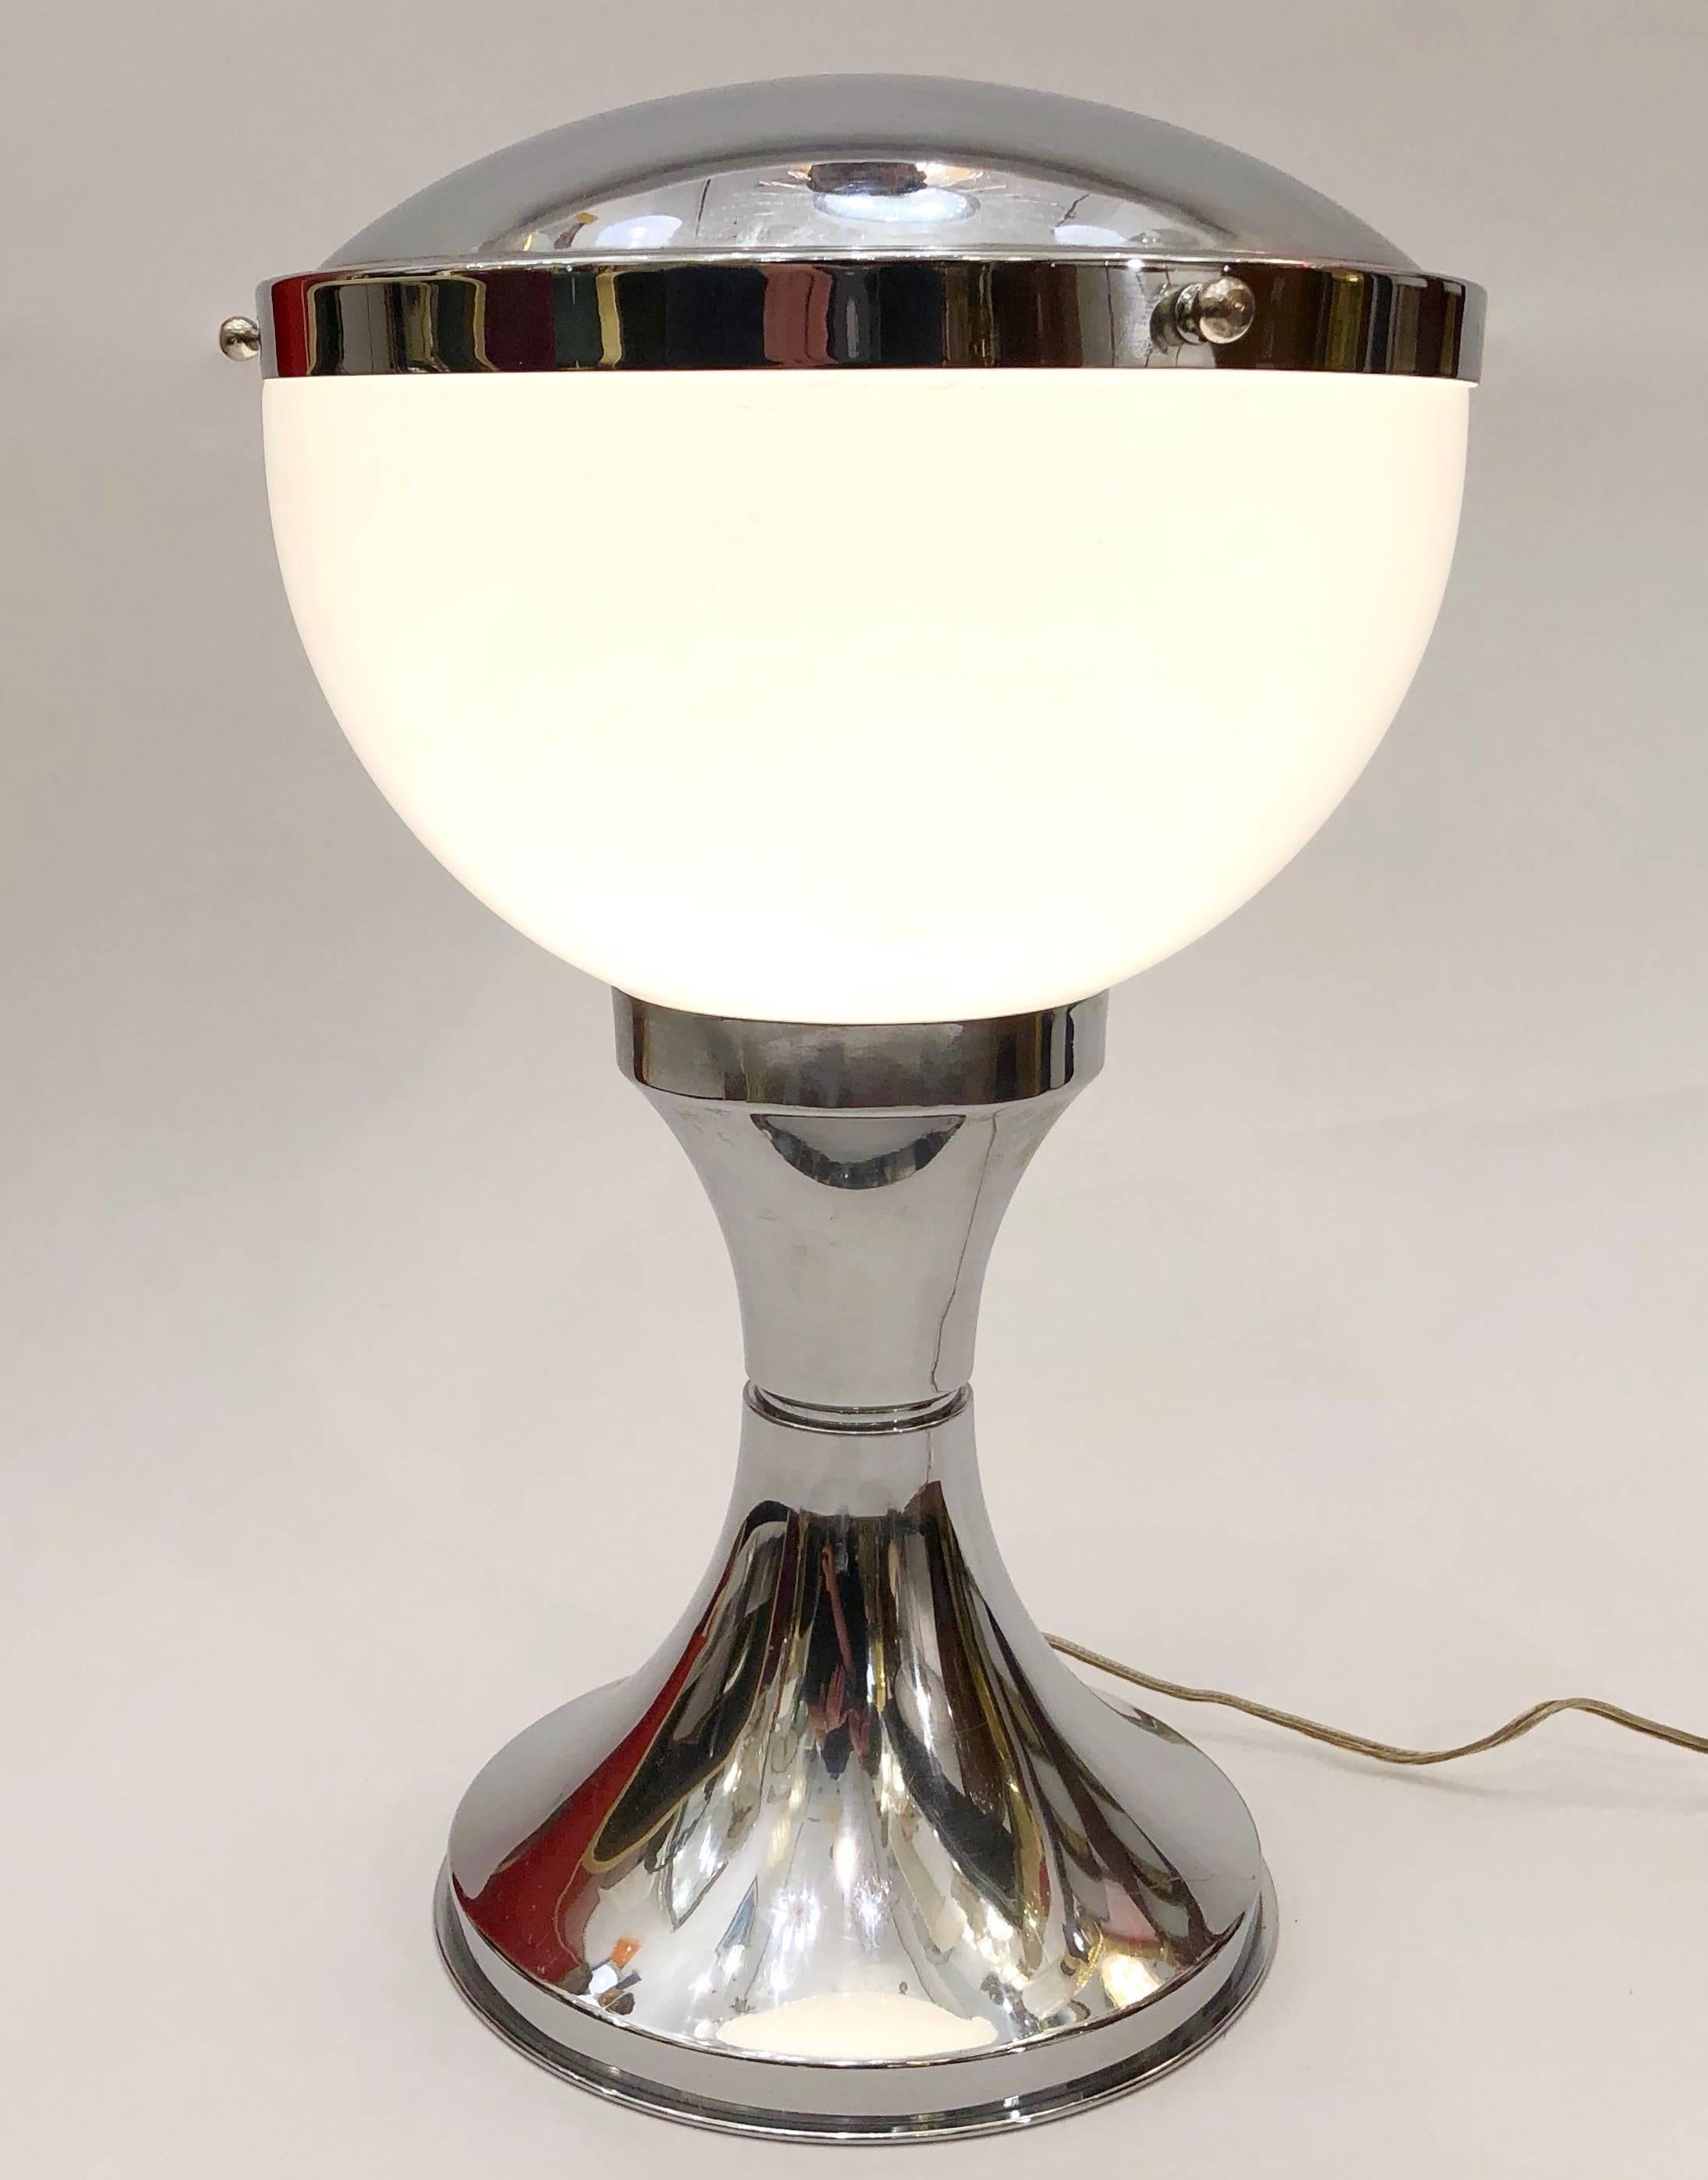 Italian design mid-century modern rare table lamp, space age mushroom shape, signed by Valenti & C., Milan. This light ideal for a desk light source has a very sleek shape, the white glass allows for plenty of illumination and the nickel finish adds